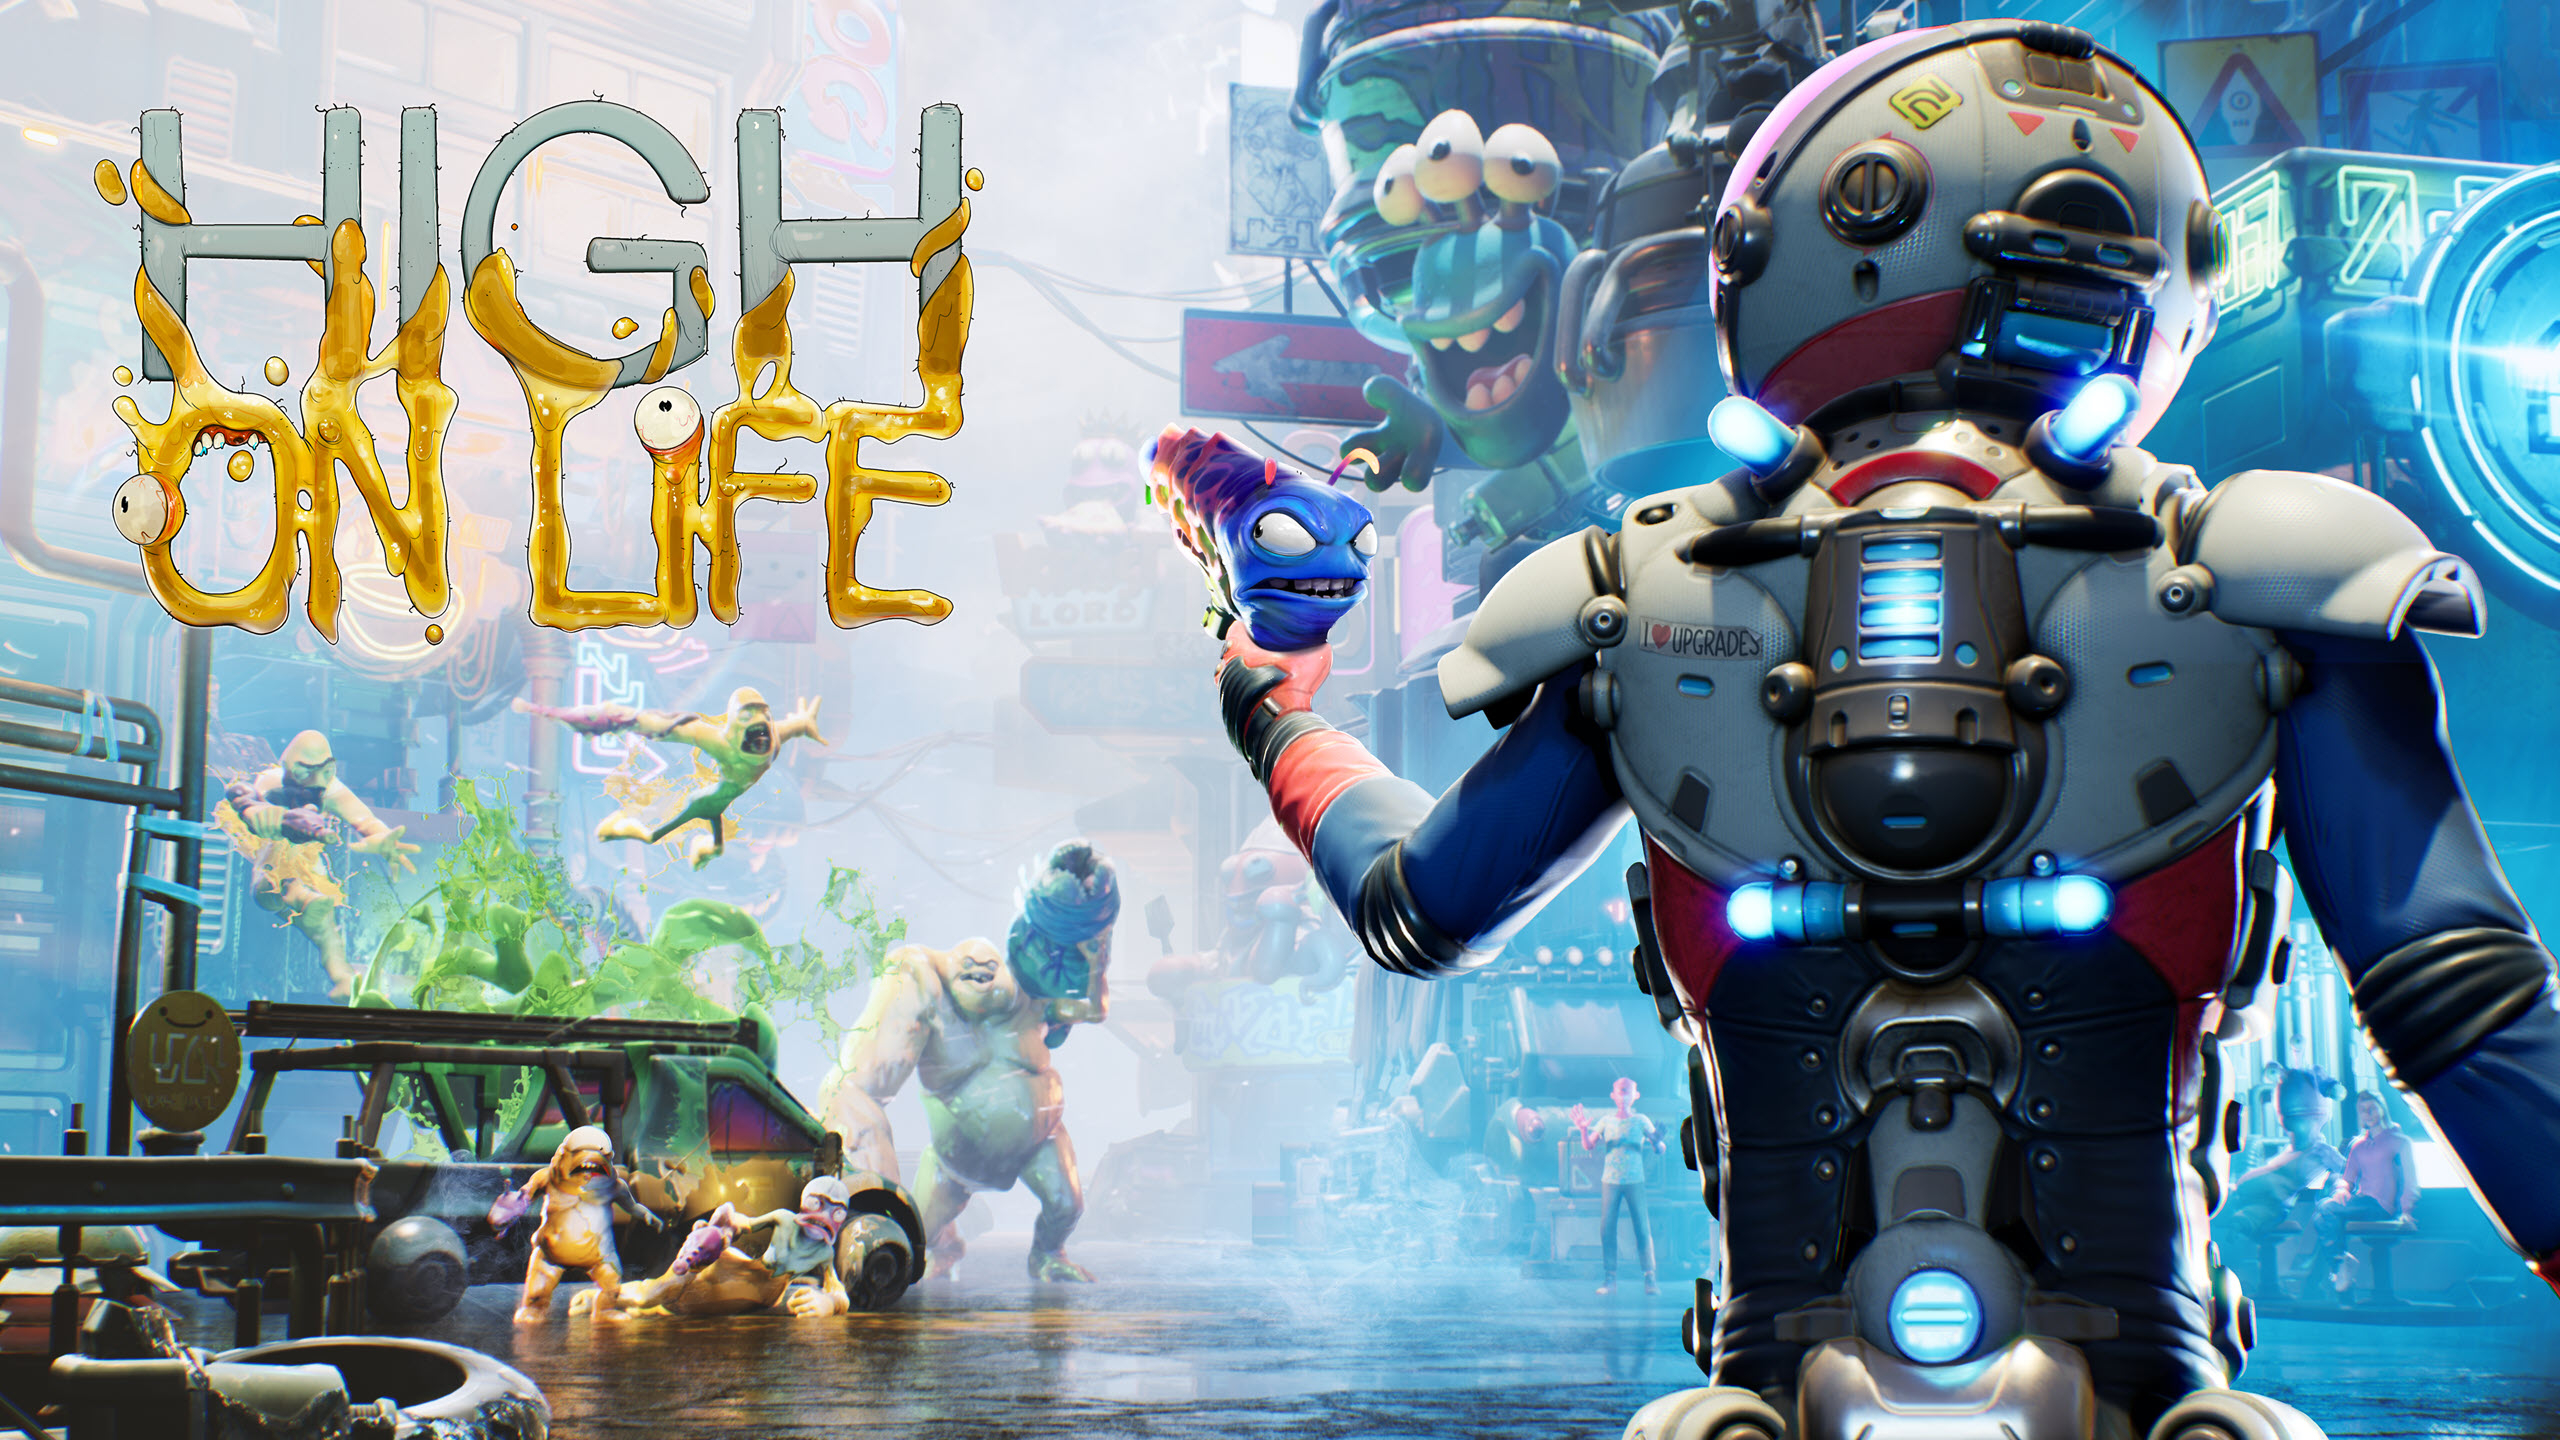 High on Life HD Wallpaper, HD Games 4K Wallpapers, Images and